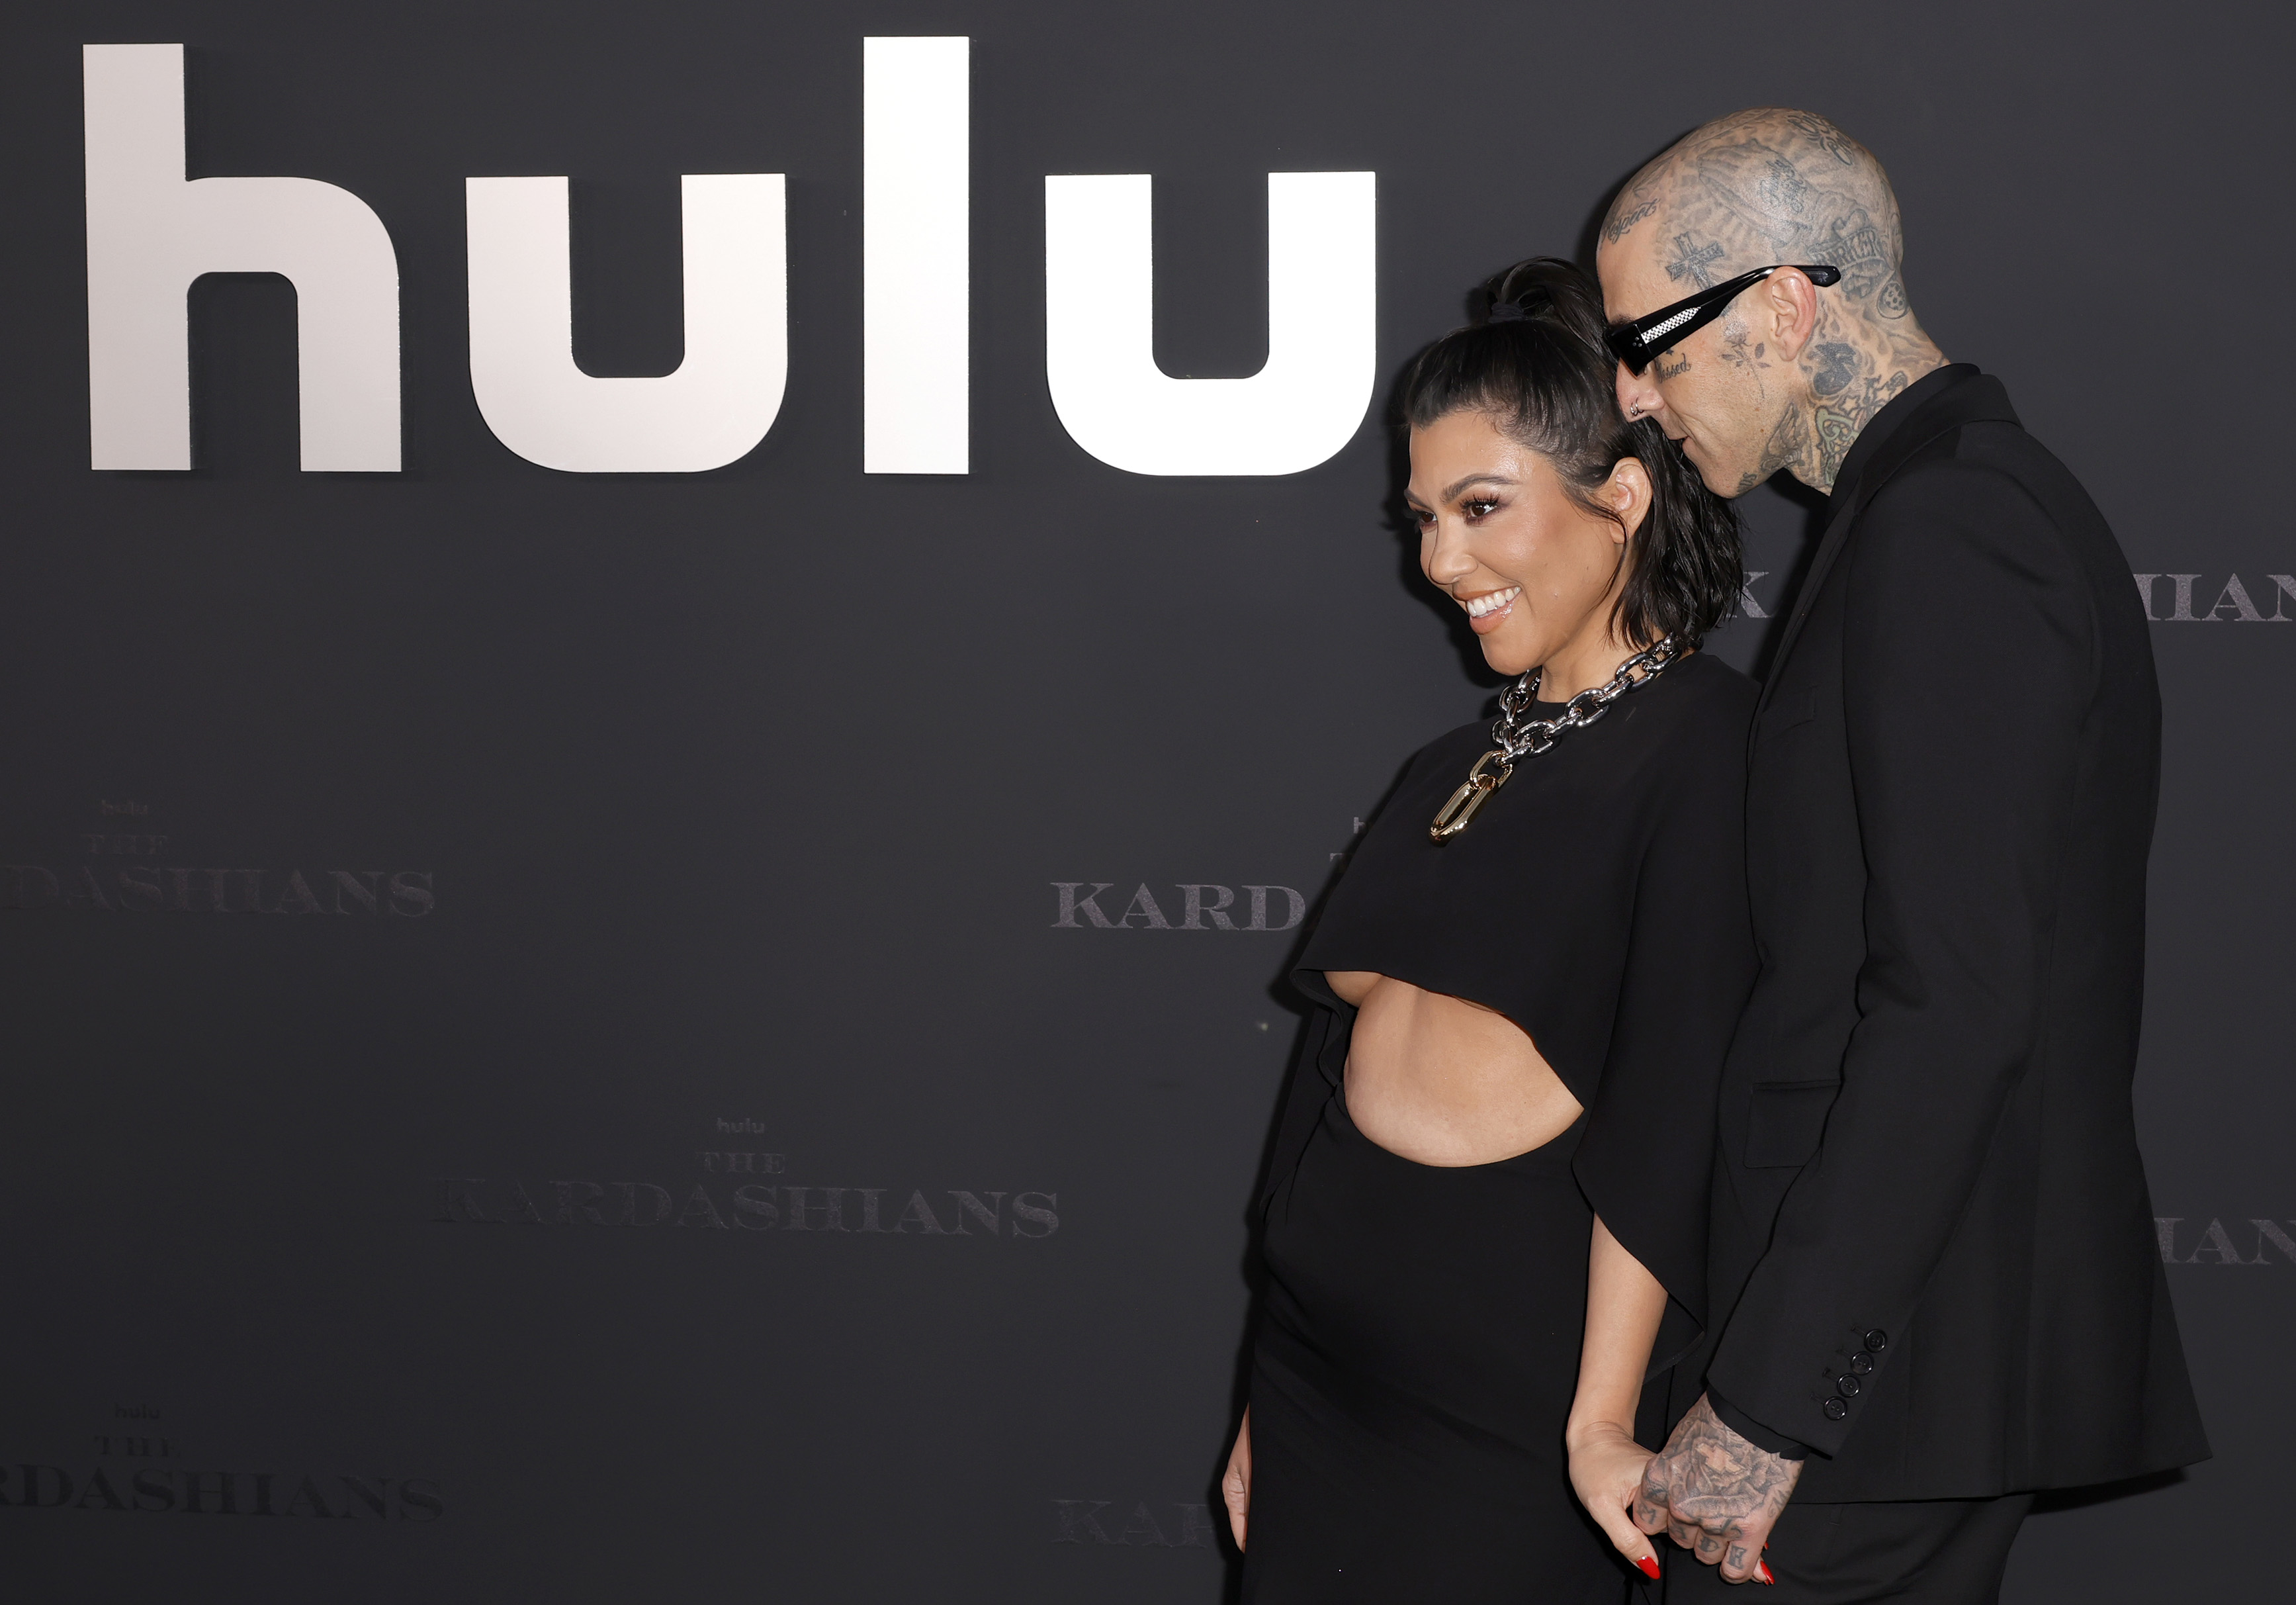 Kourtney and Travis hold hands as they stand on the red carpet